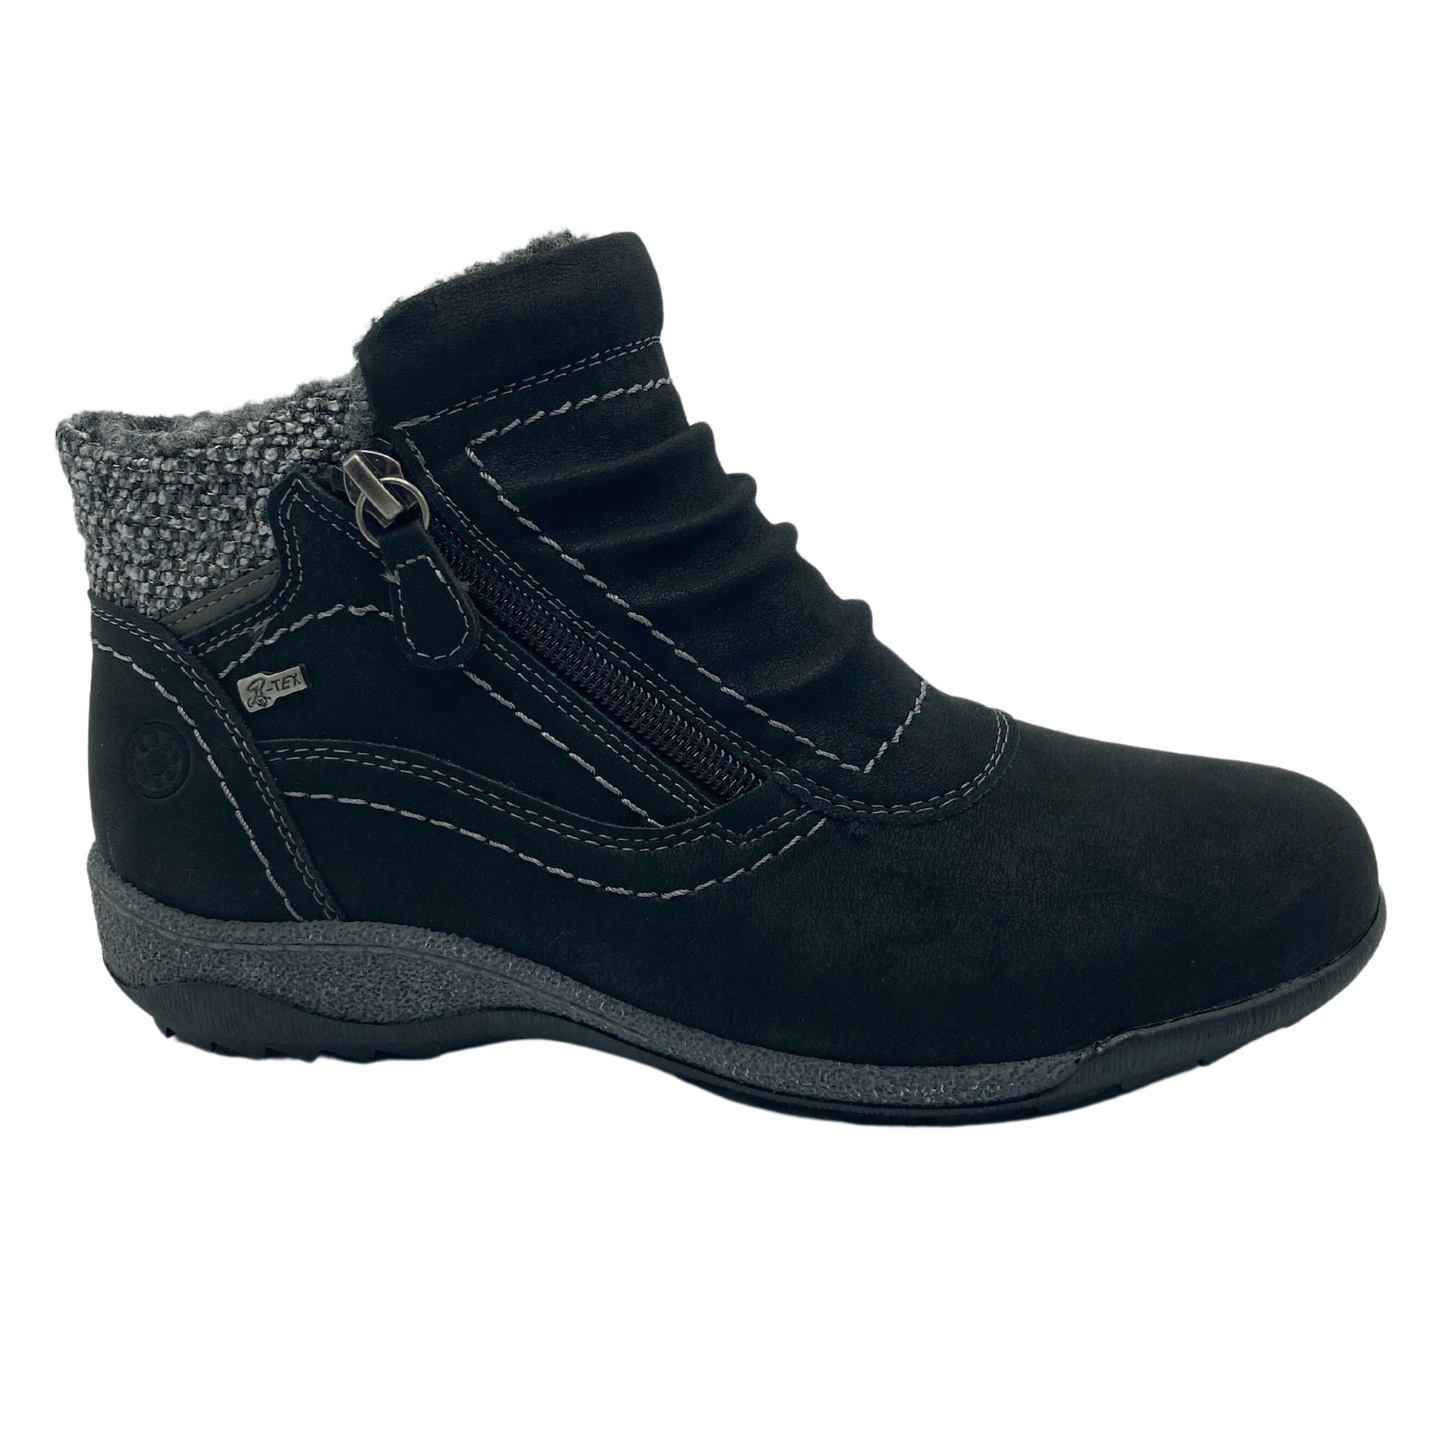 Right facing view of black suede ankle boot with rubber outsole and side zipper closure. Grey insulated lining and slouched detail on upper